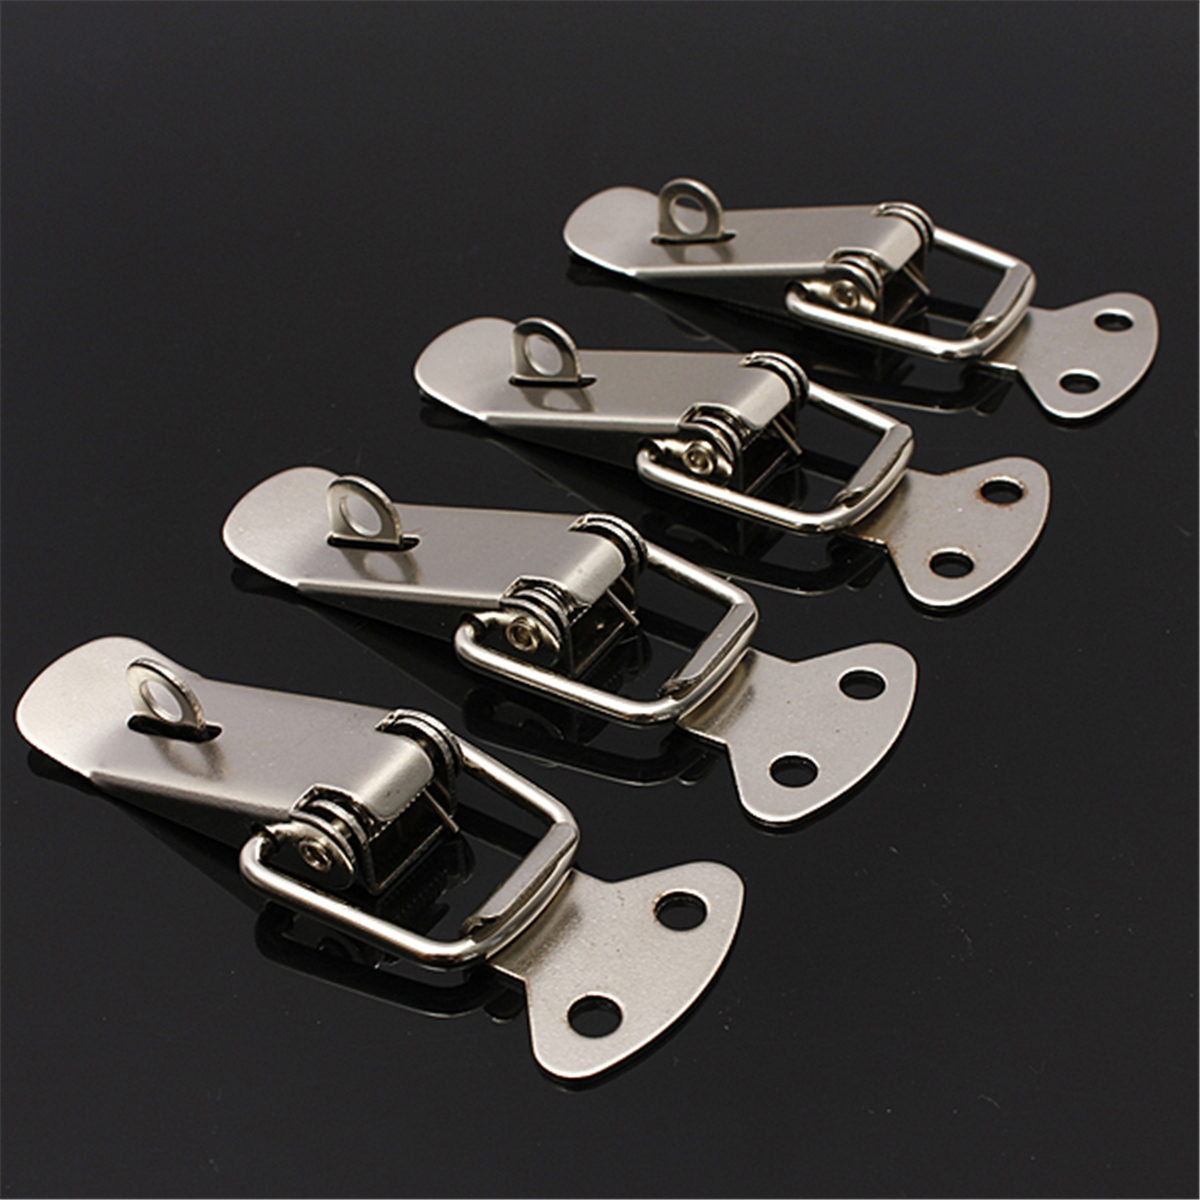 4PCS-Case-Box-Chest-Spring-Stainless-Tone-Lock-Toggle-Latch-Catch-Clasp-948011-3